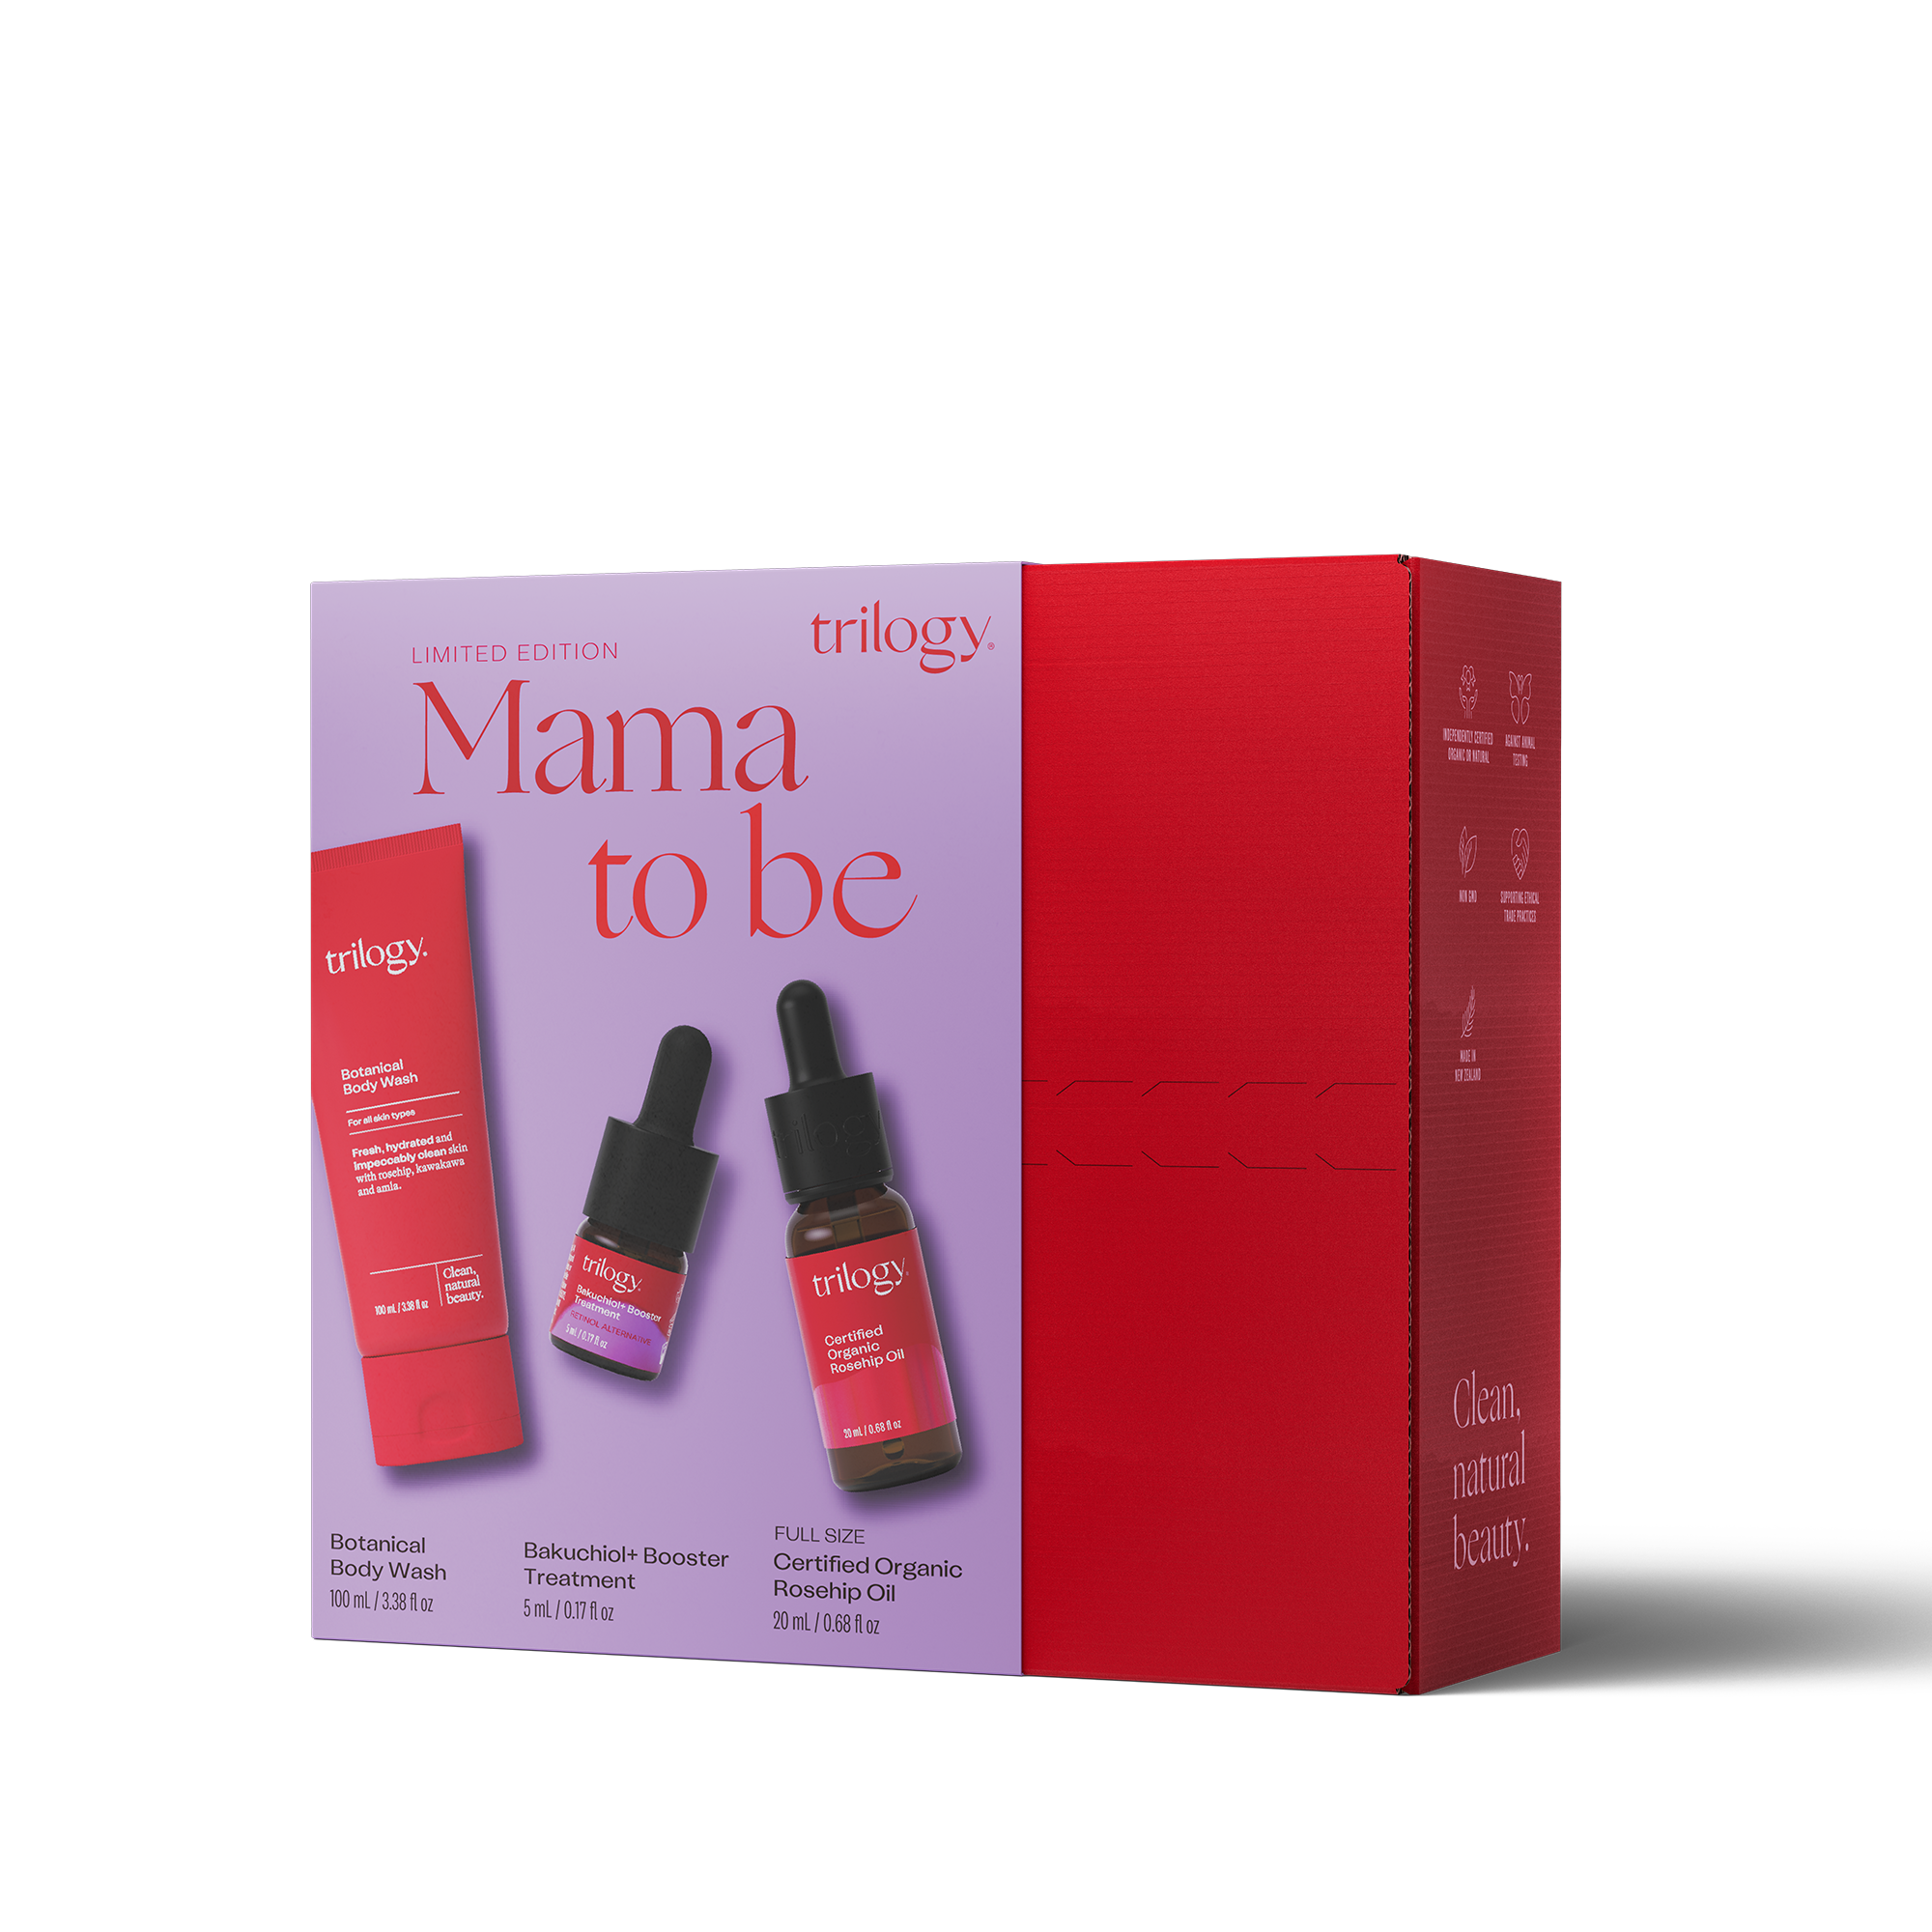 Limited Edition Mama To Be Gift Set